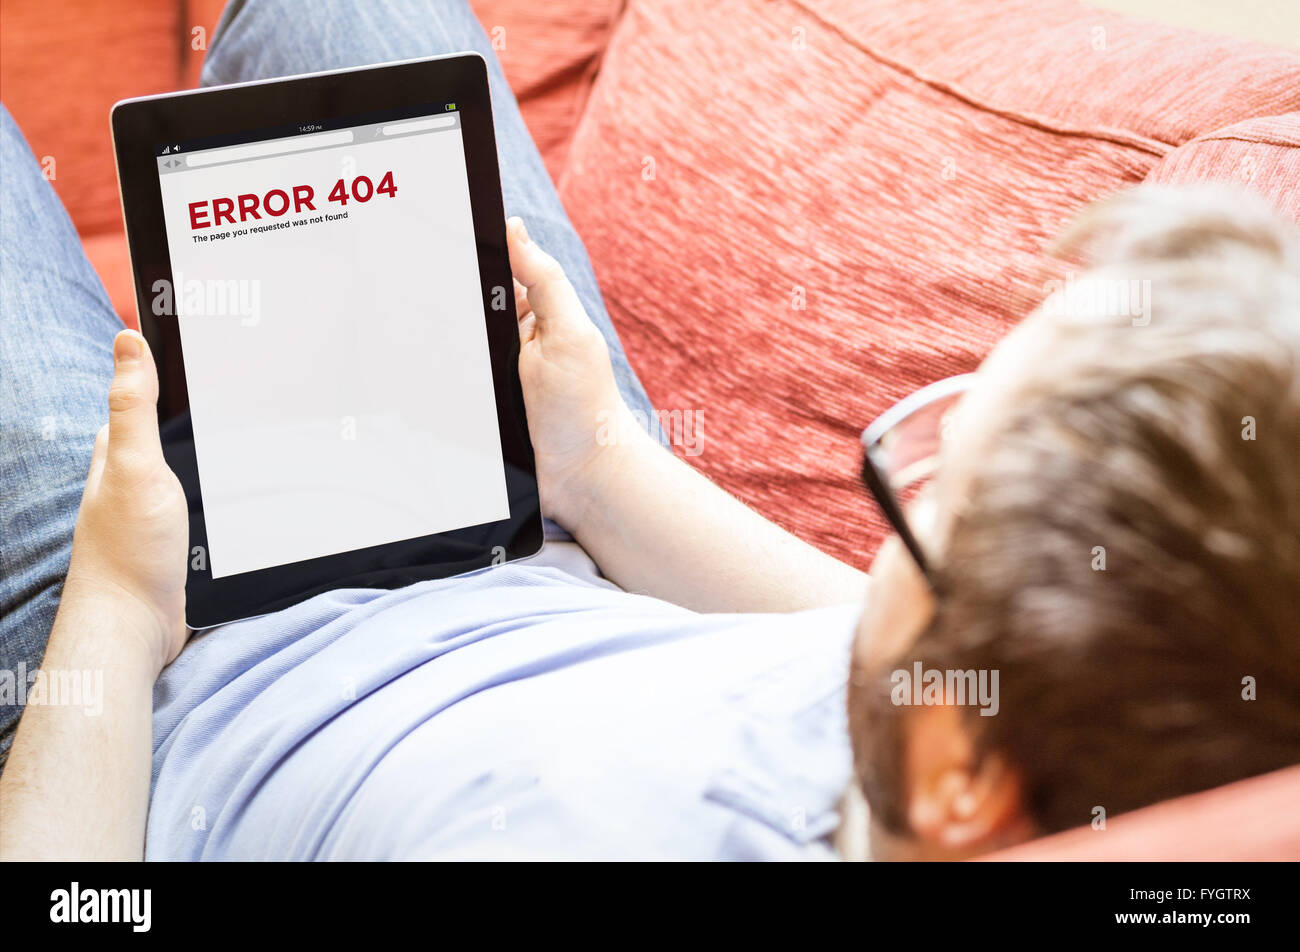 technology lifestyle connectivity concept: hipster man with error 404 on a tablet at the sofa Stock Photo